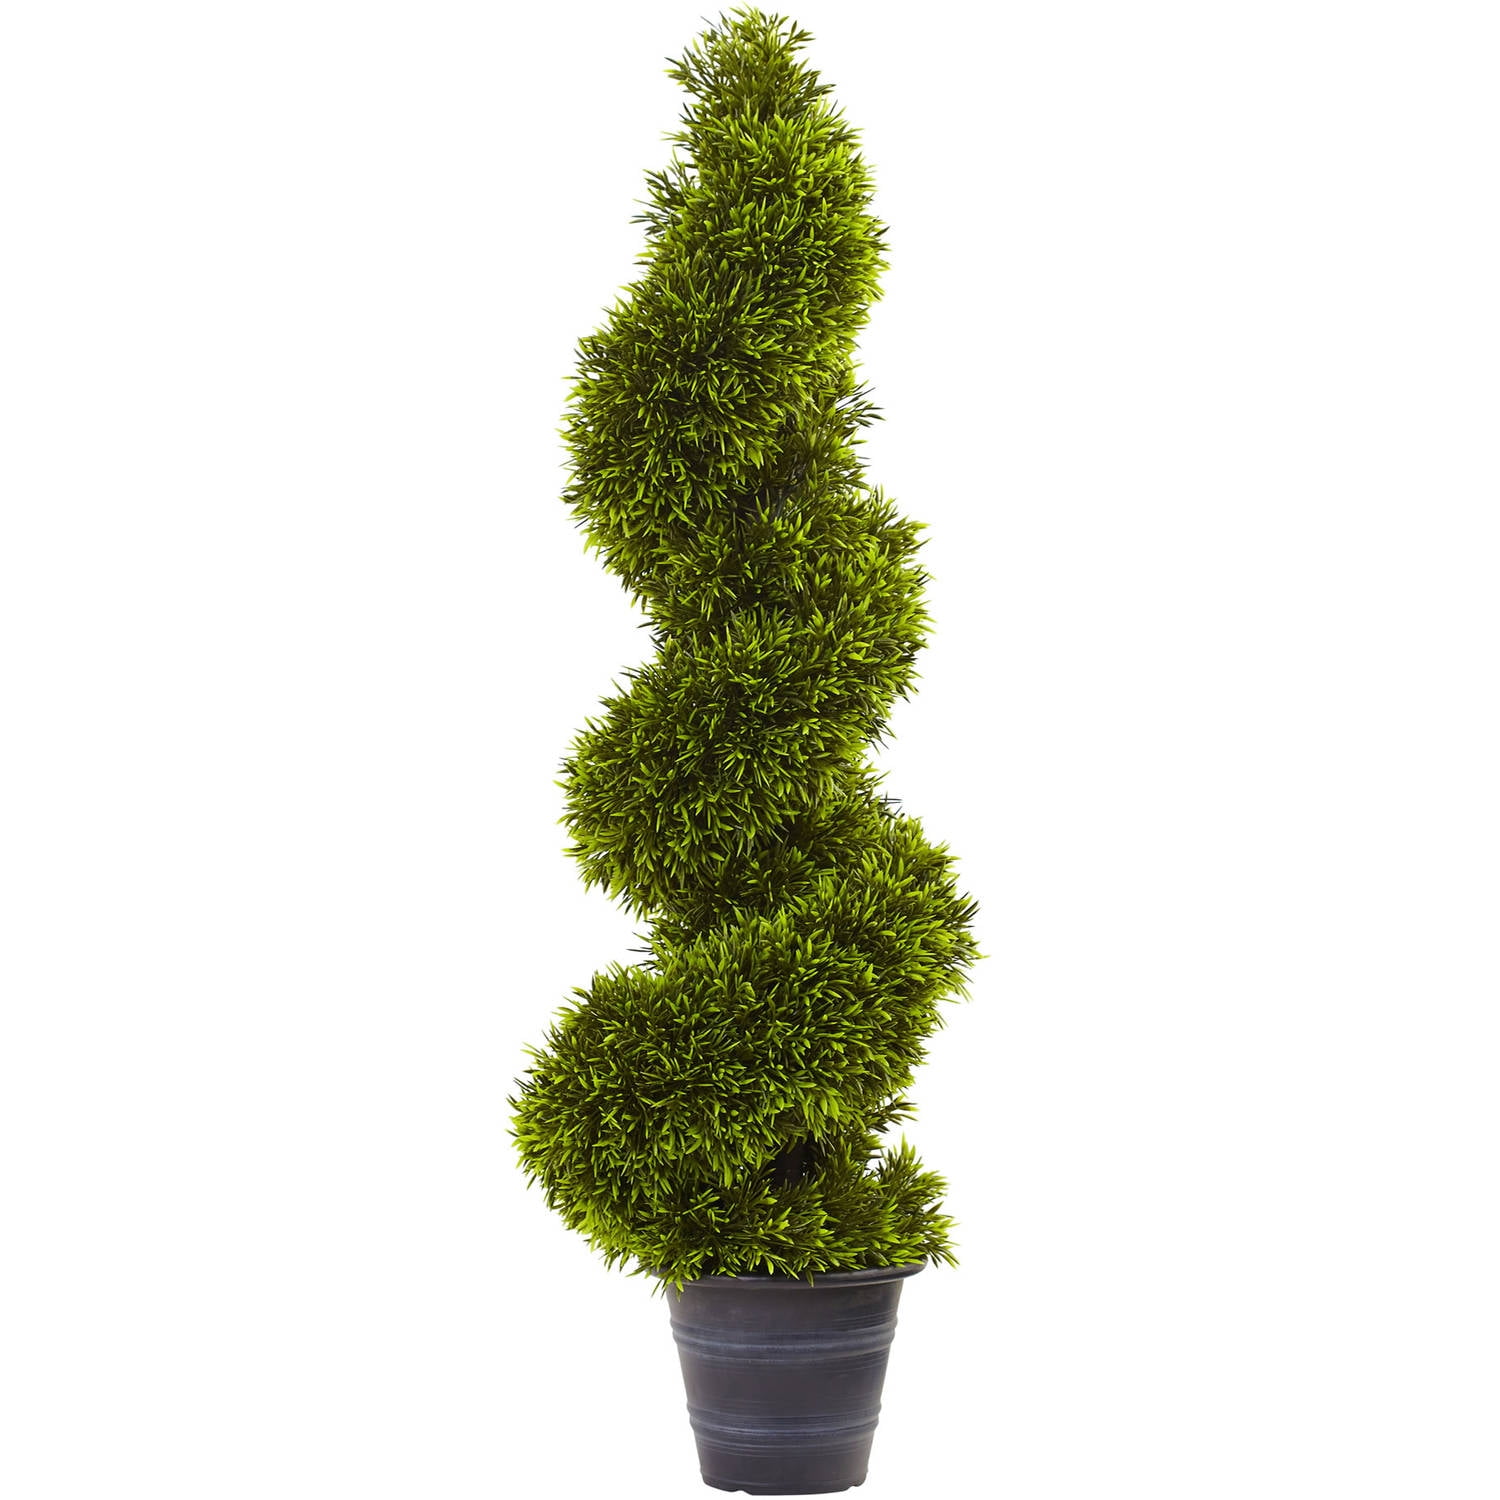 Silk Tree Warehouse Two 4 Foot 3 Inch Artificial Cypress Spiral Topiary Trees Potted Indoor or Outdoor